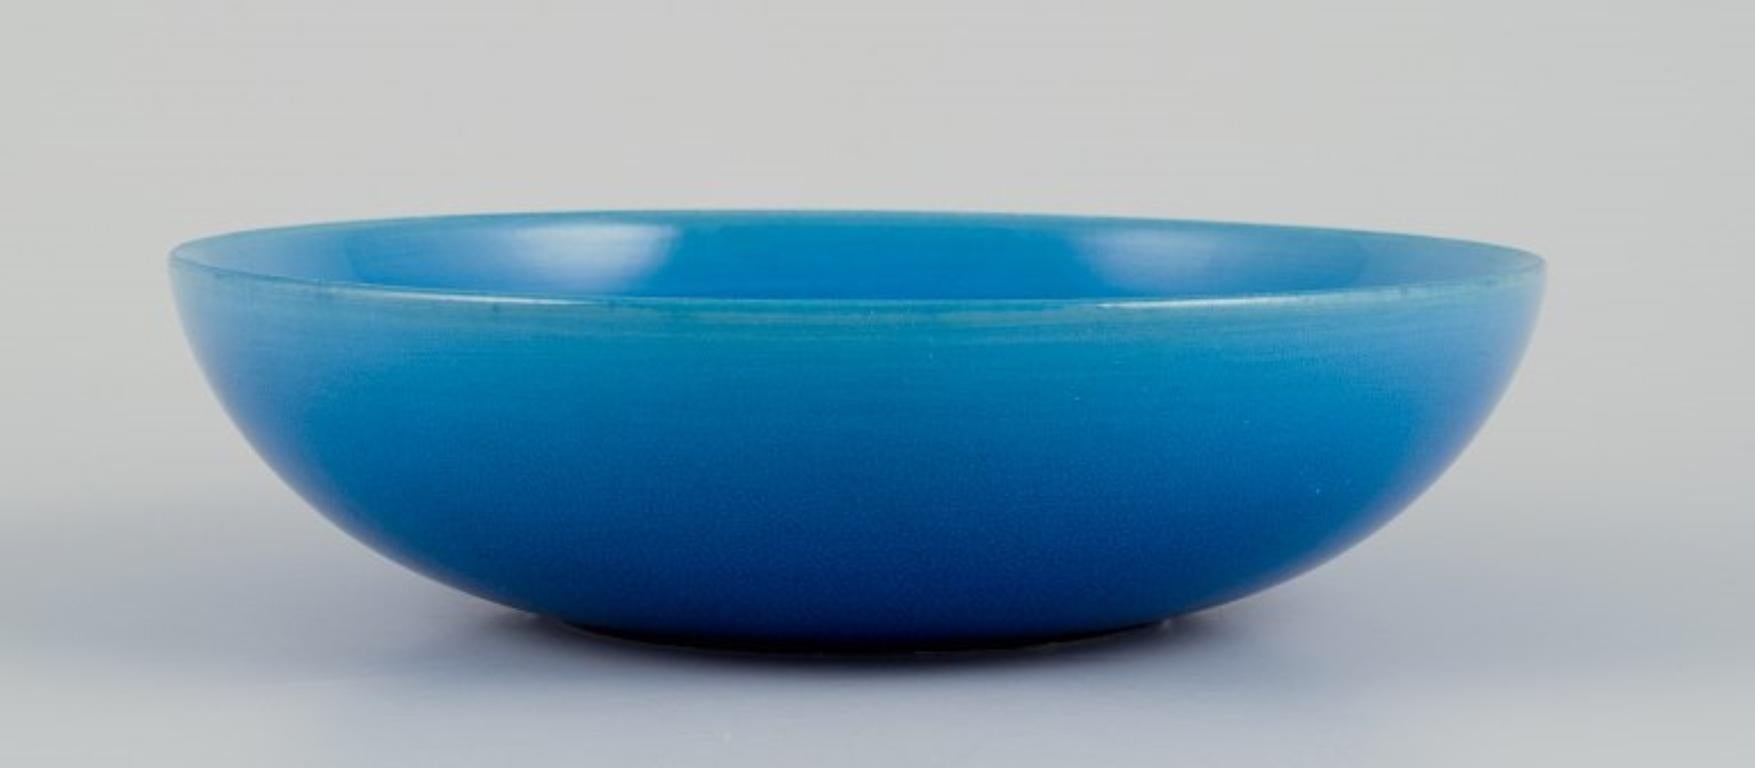 Carl Harry Stålhane (1920-1990) for Rörstrand, Sweden. 
Ceramic bowl in turquoise glaze.
Mid-20th century.
Marked.
In perfect condition with natural crackling.
Second factory quality.
Dimensions: Diameter 18.0 cm x Height 4.5 cm.